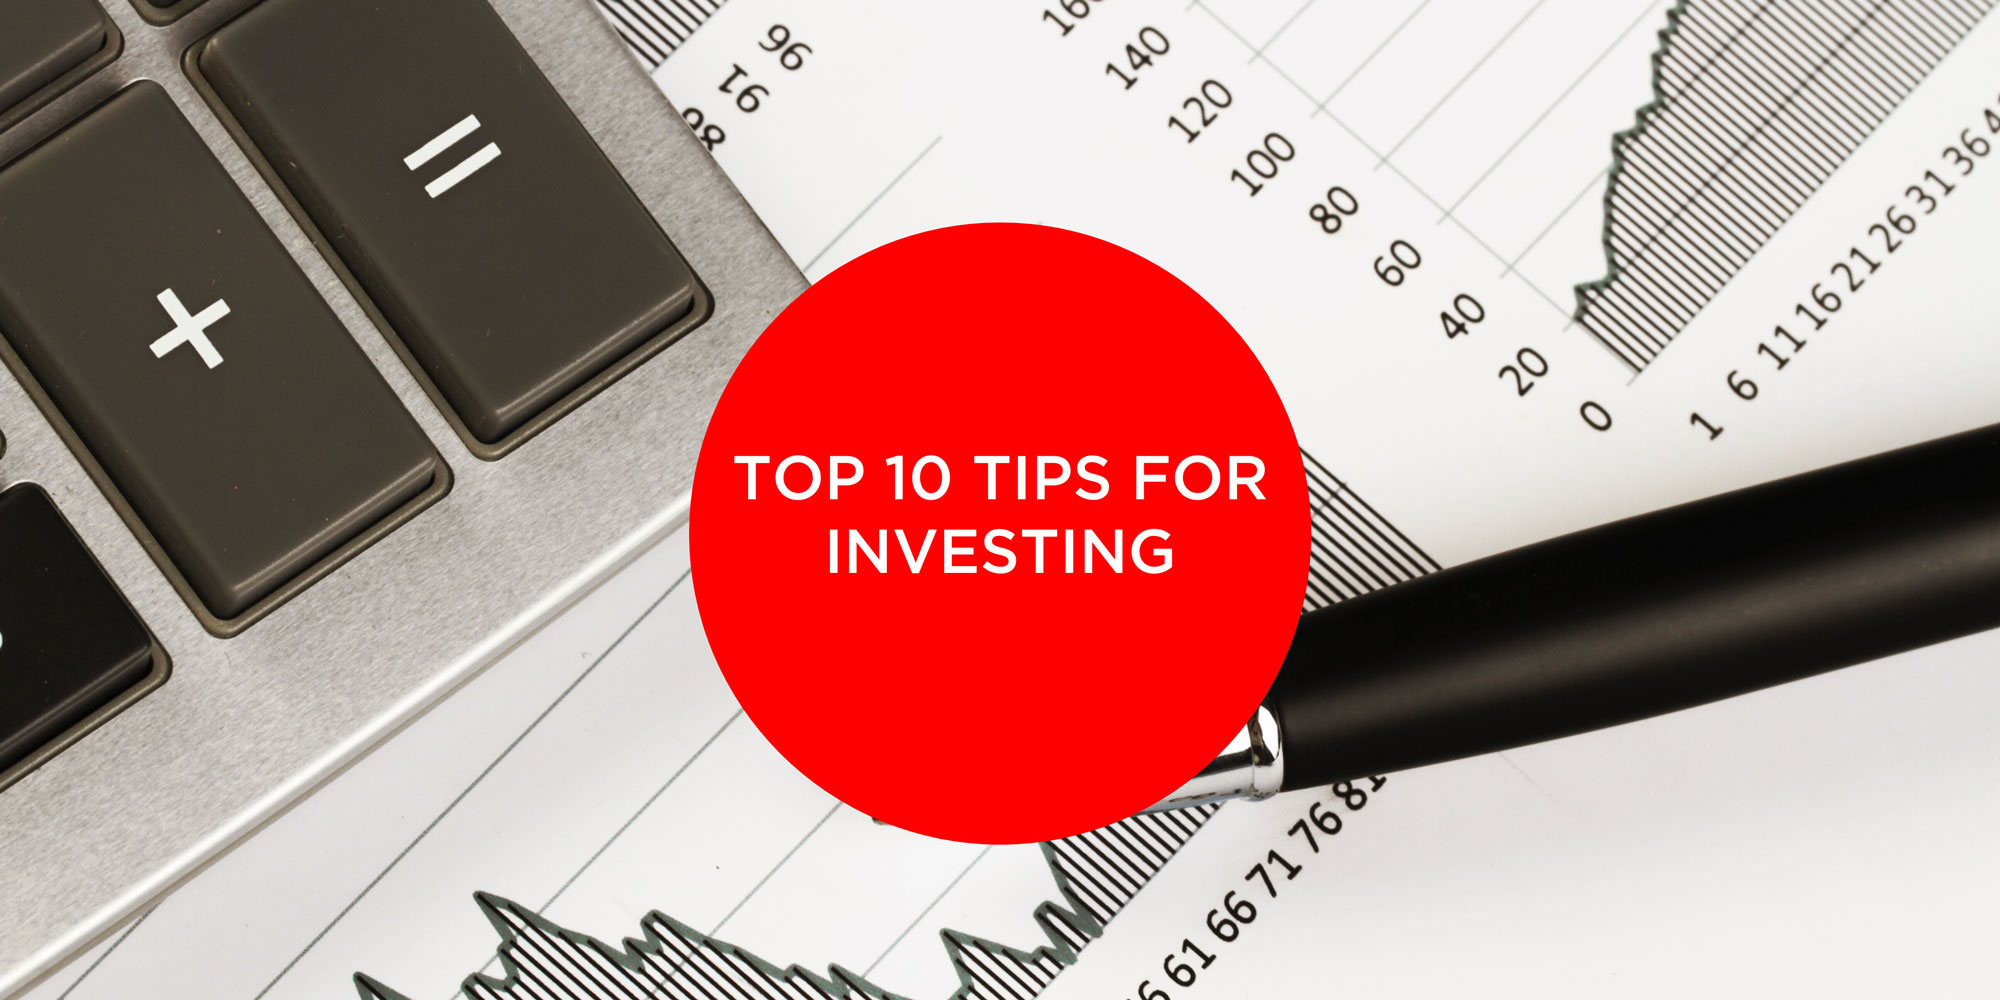 Top 10 Tips For Investing